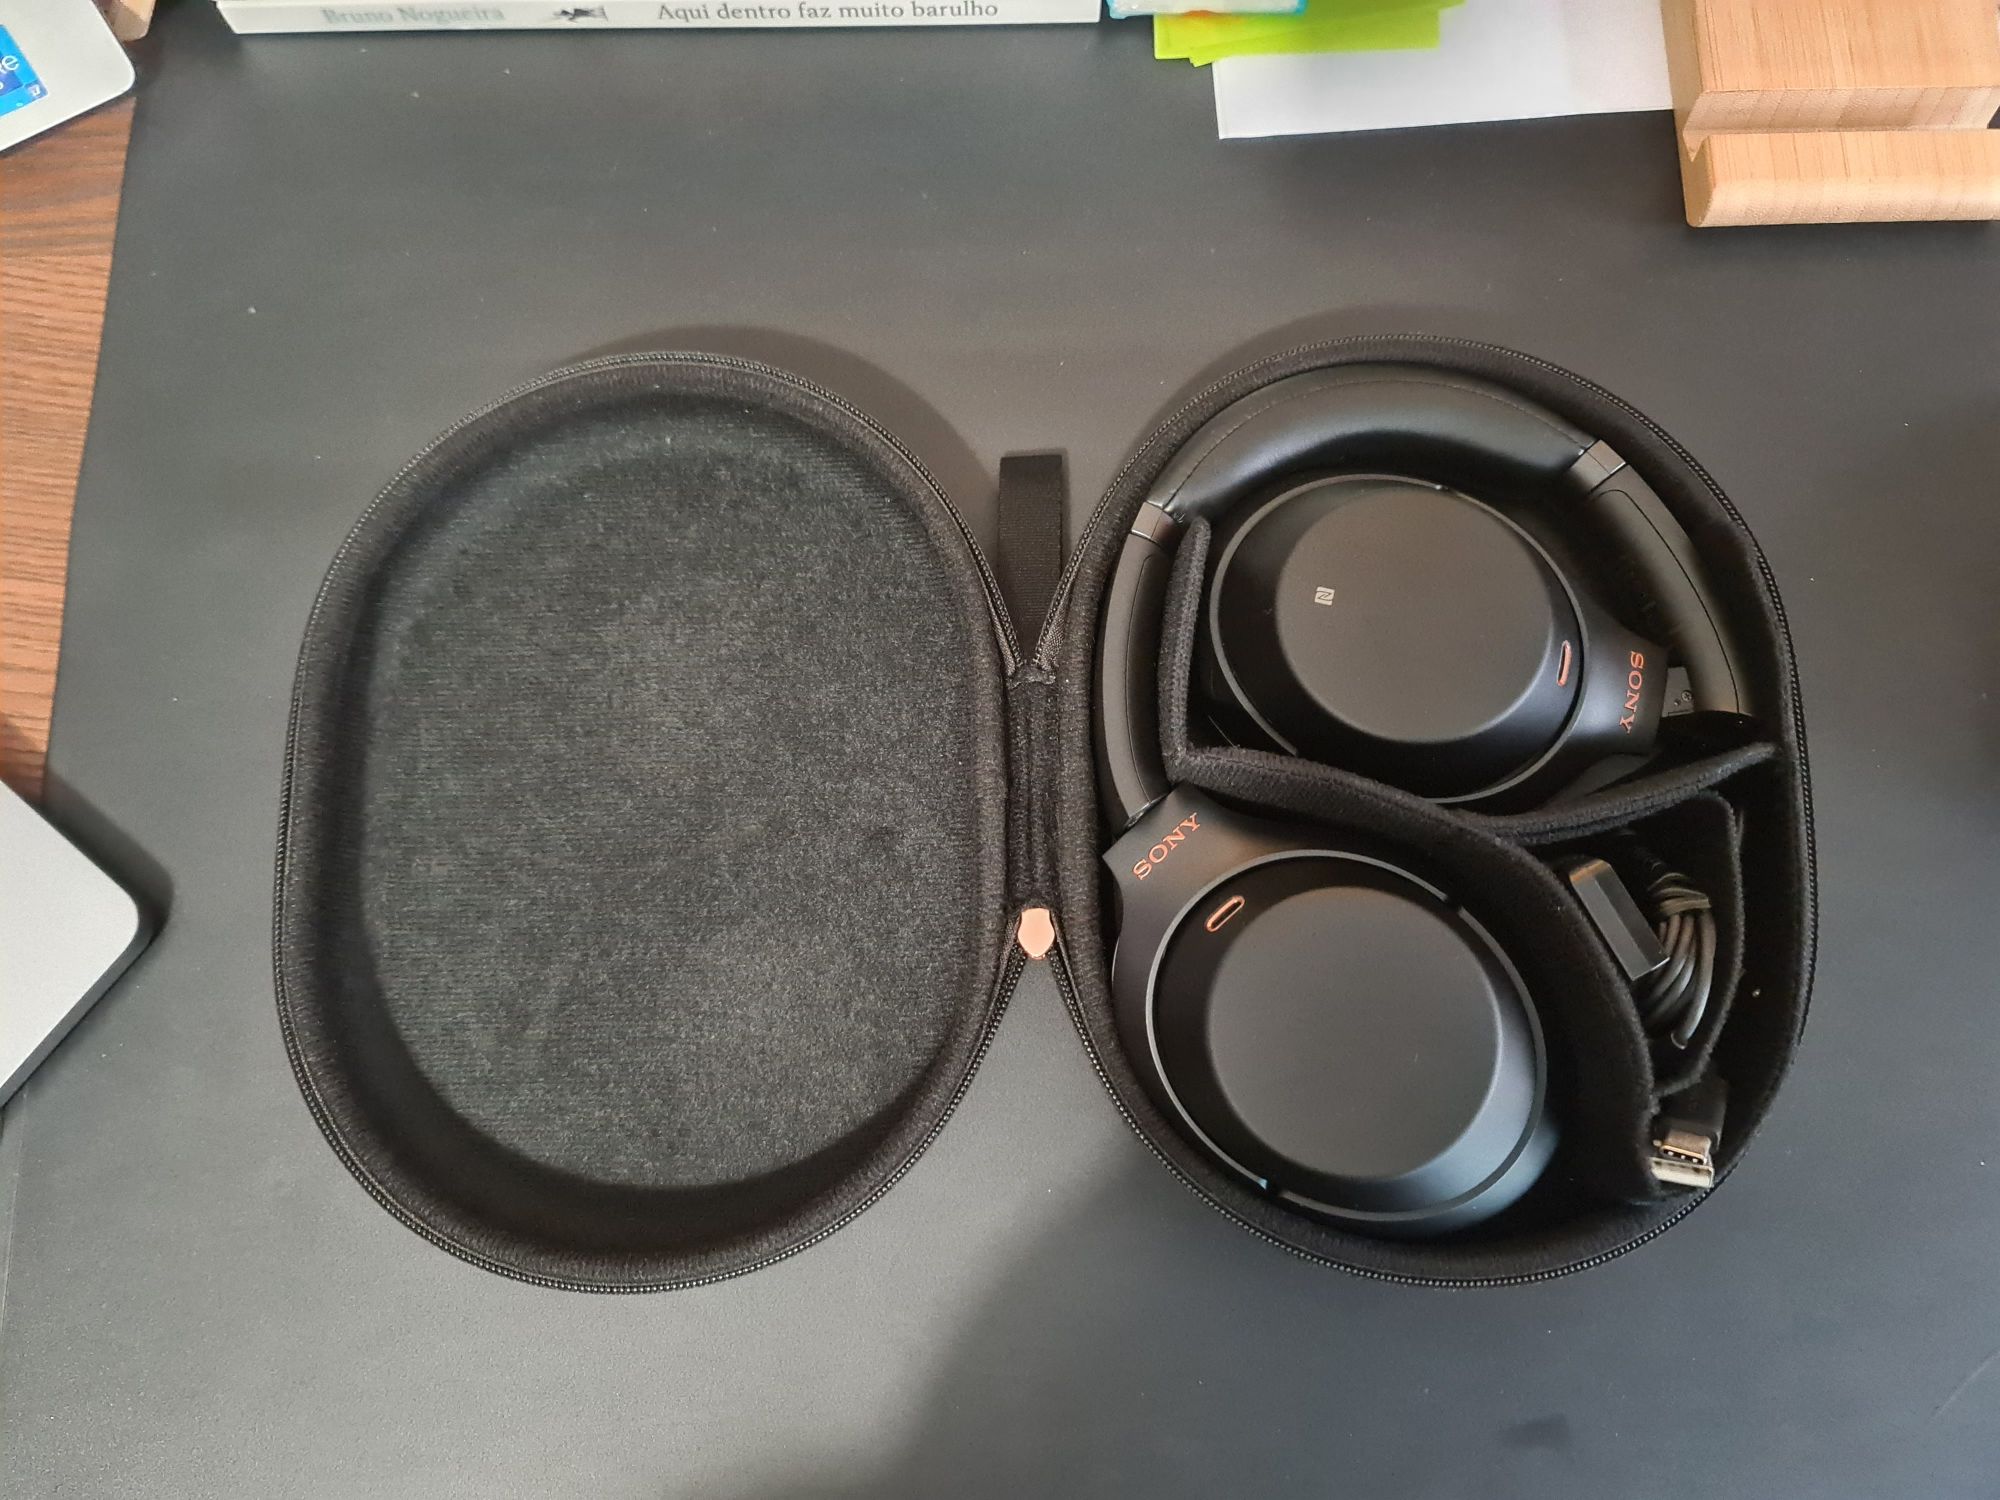 Sony WH-1000XM3 Preto Noise Cancelling